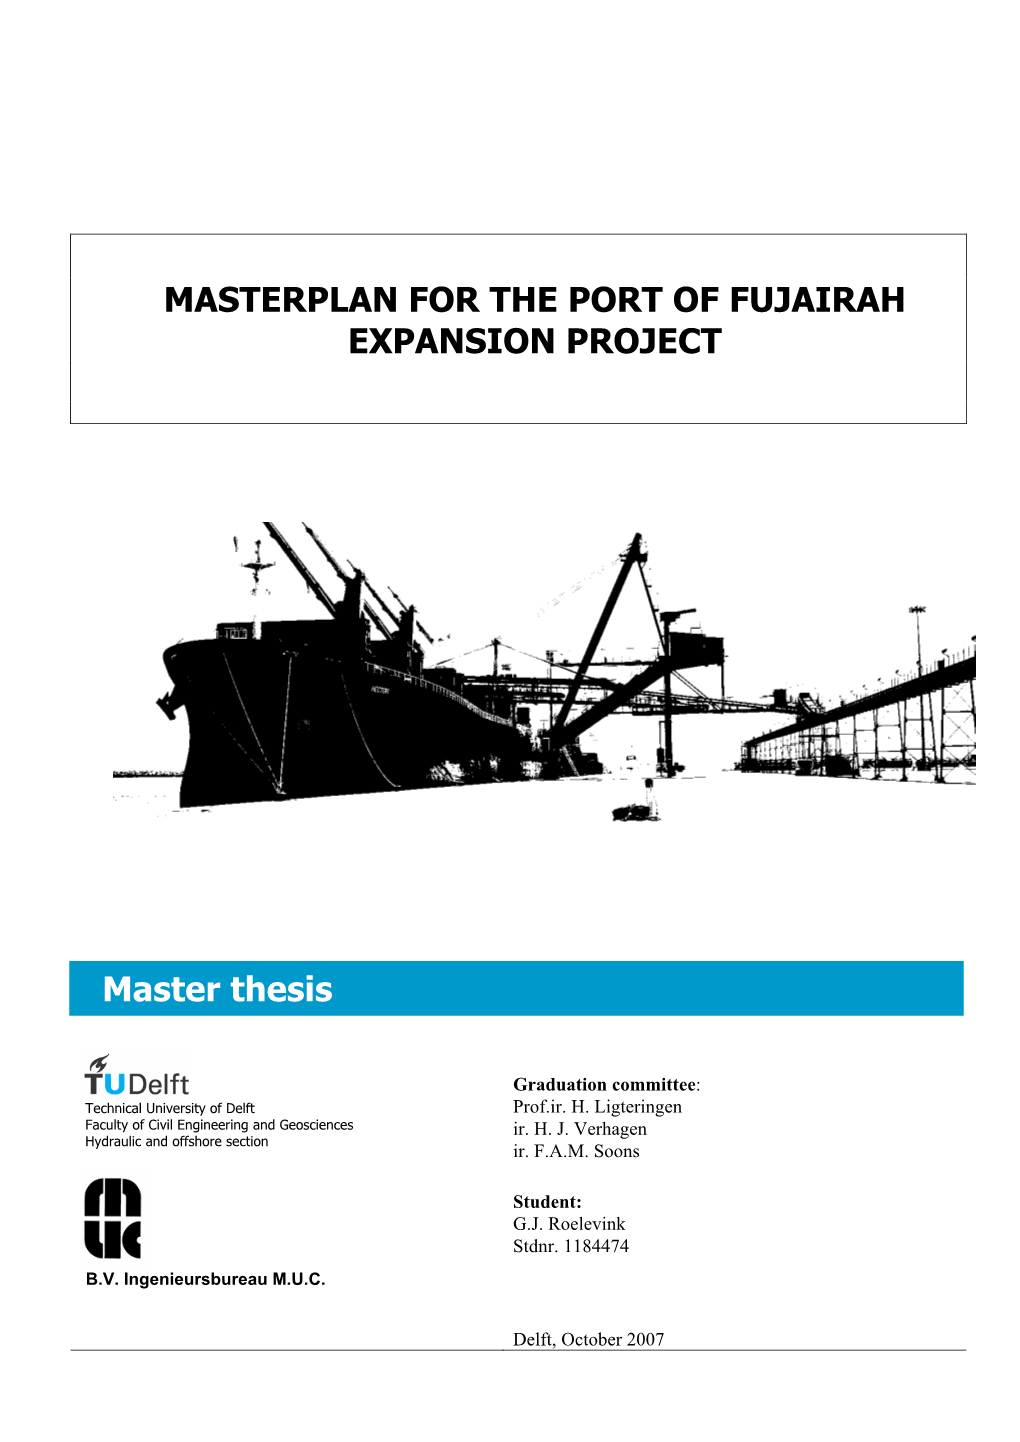 Masterplan for the Port of Fujairah Expansion Project